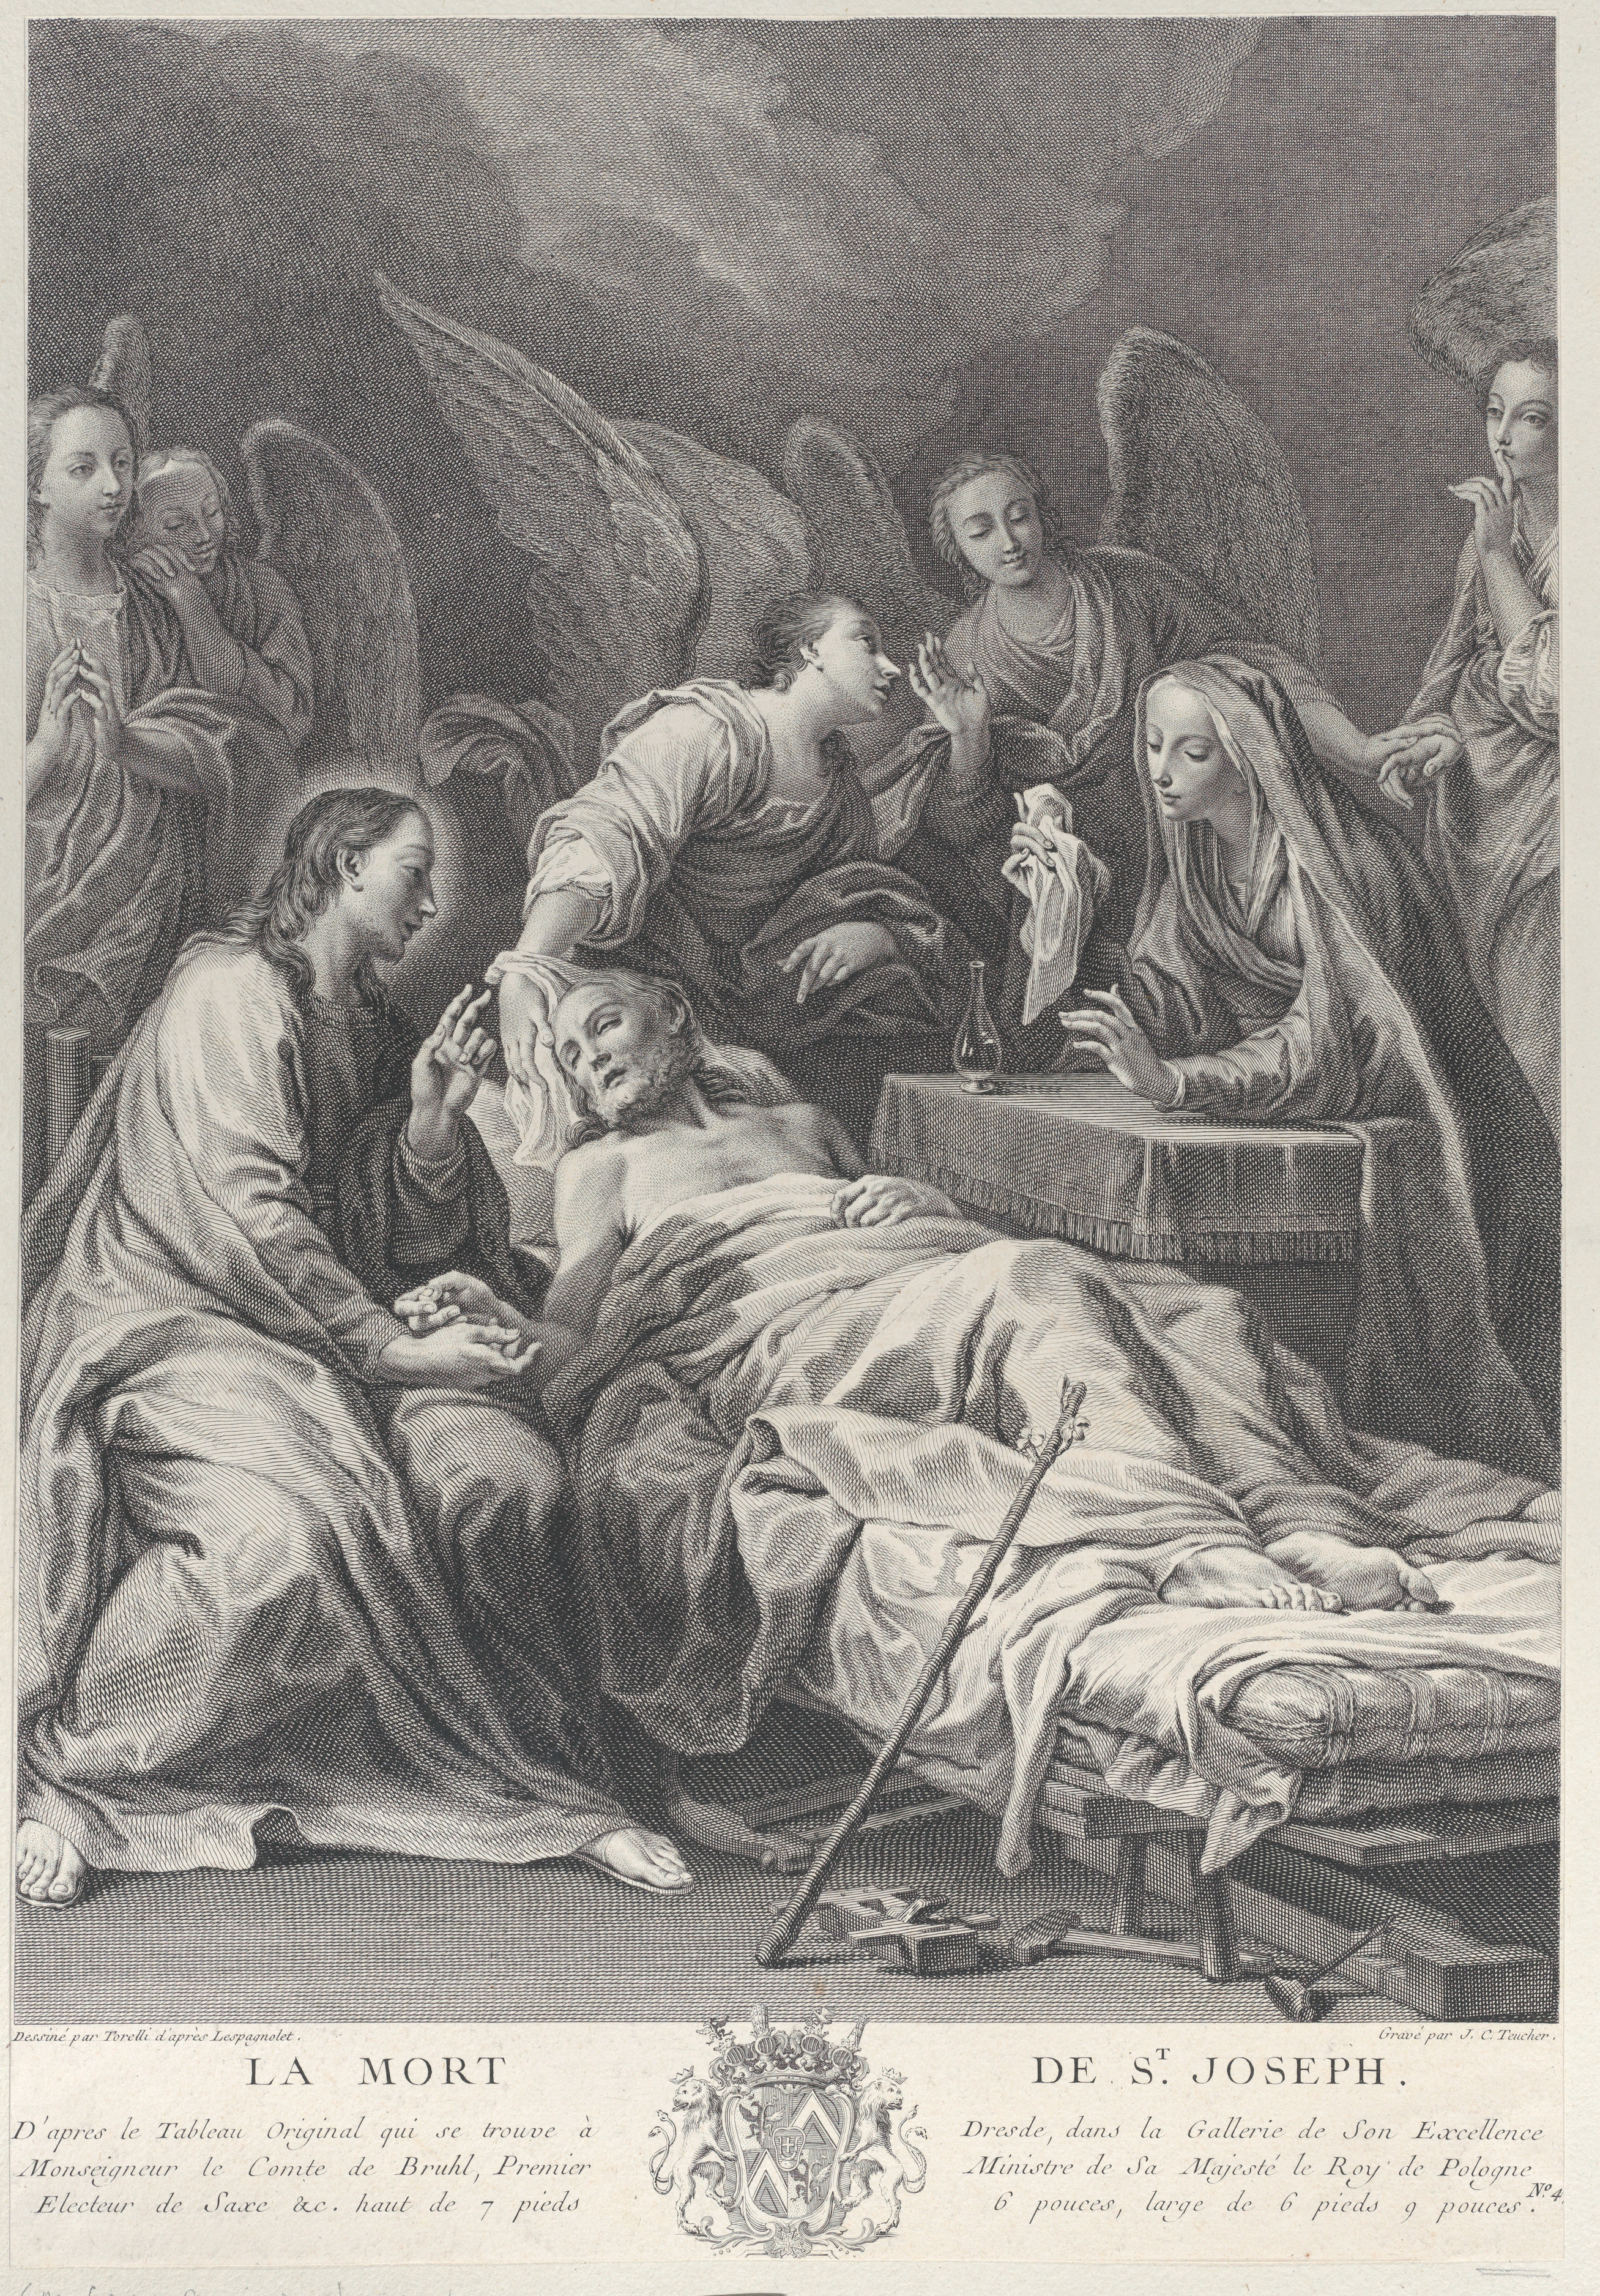 Johann Christian Teucher The Death Of Saint Joseph Lying On A Bed With Jesus The Virgin Mary And Angels At His Side The Metropolitan Museum Of Art